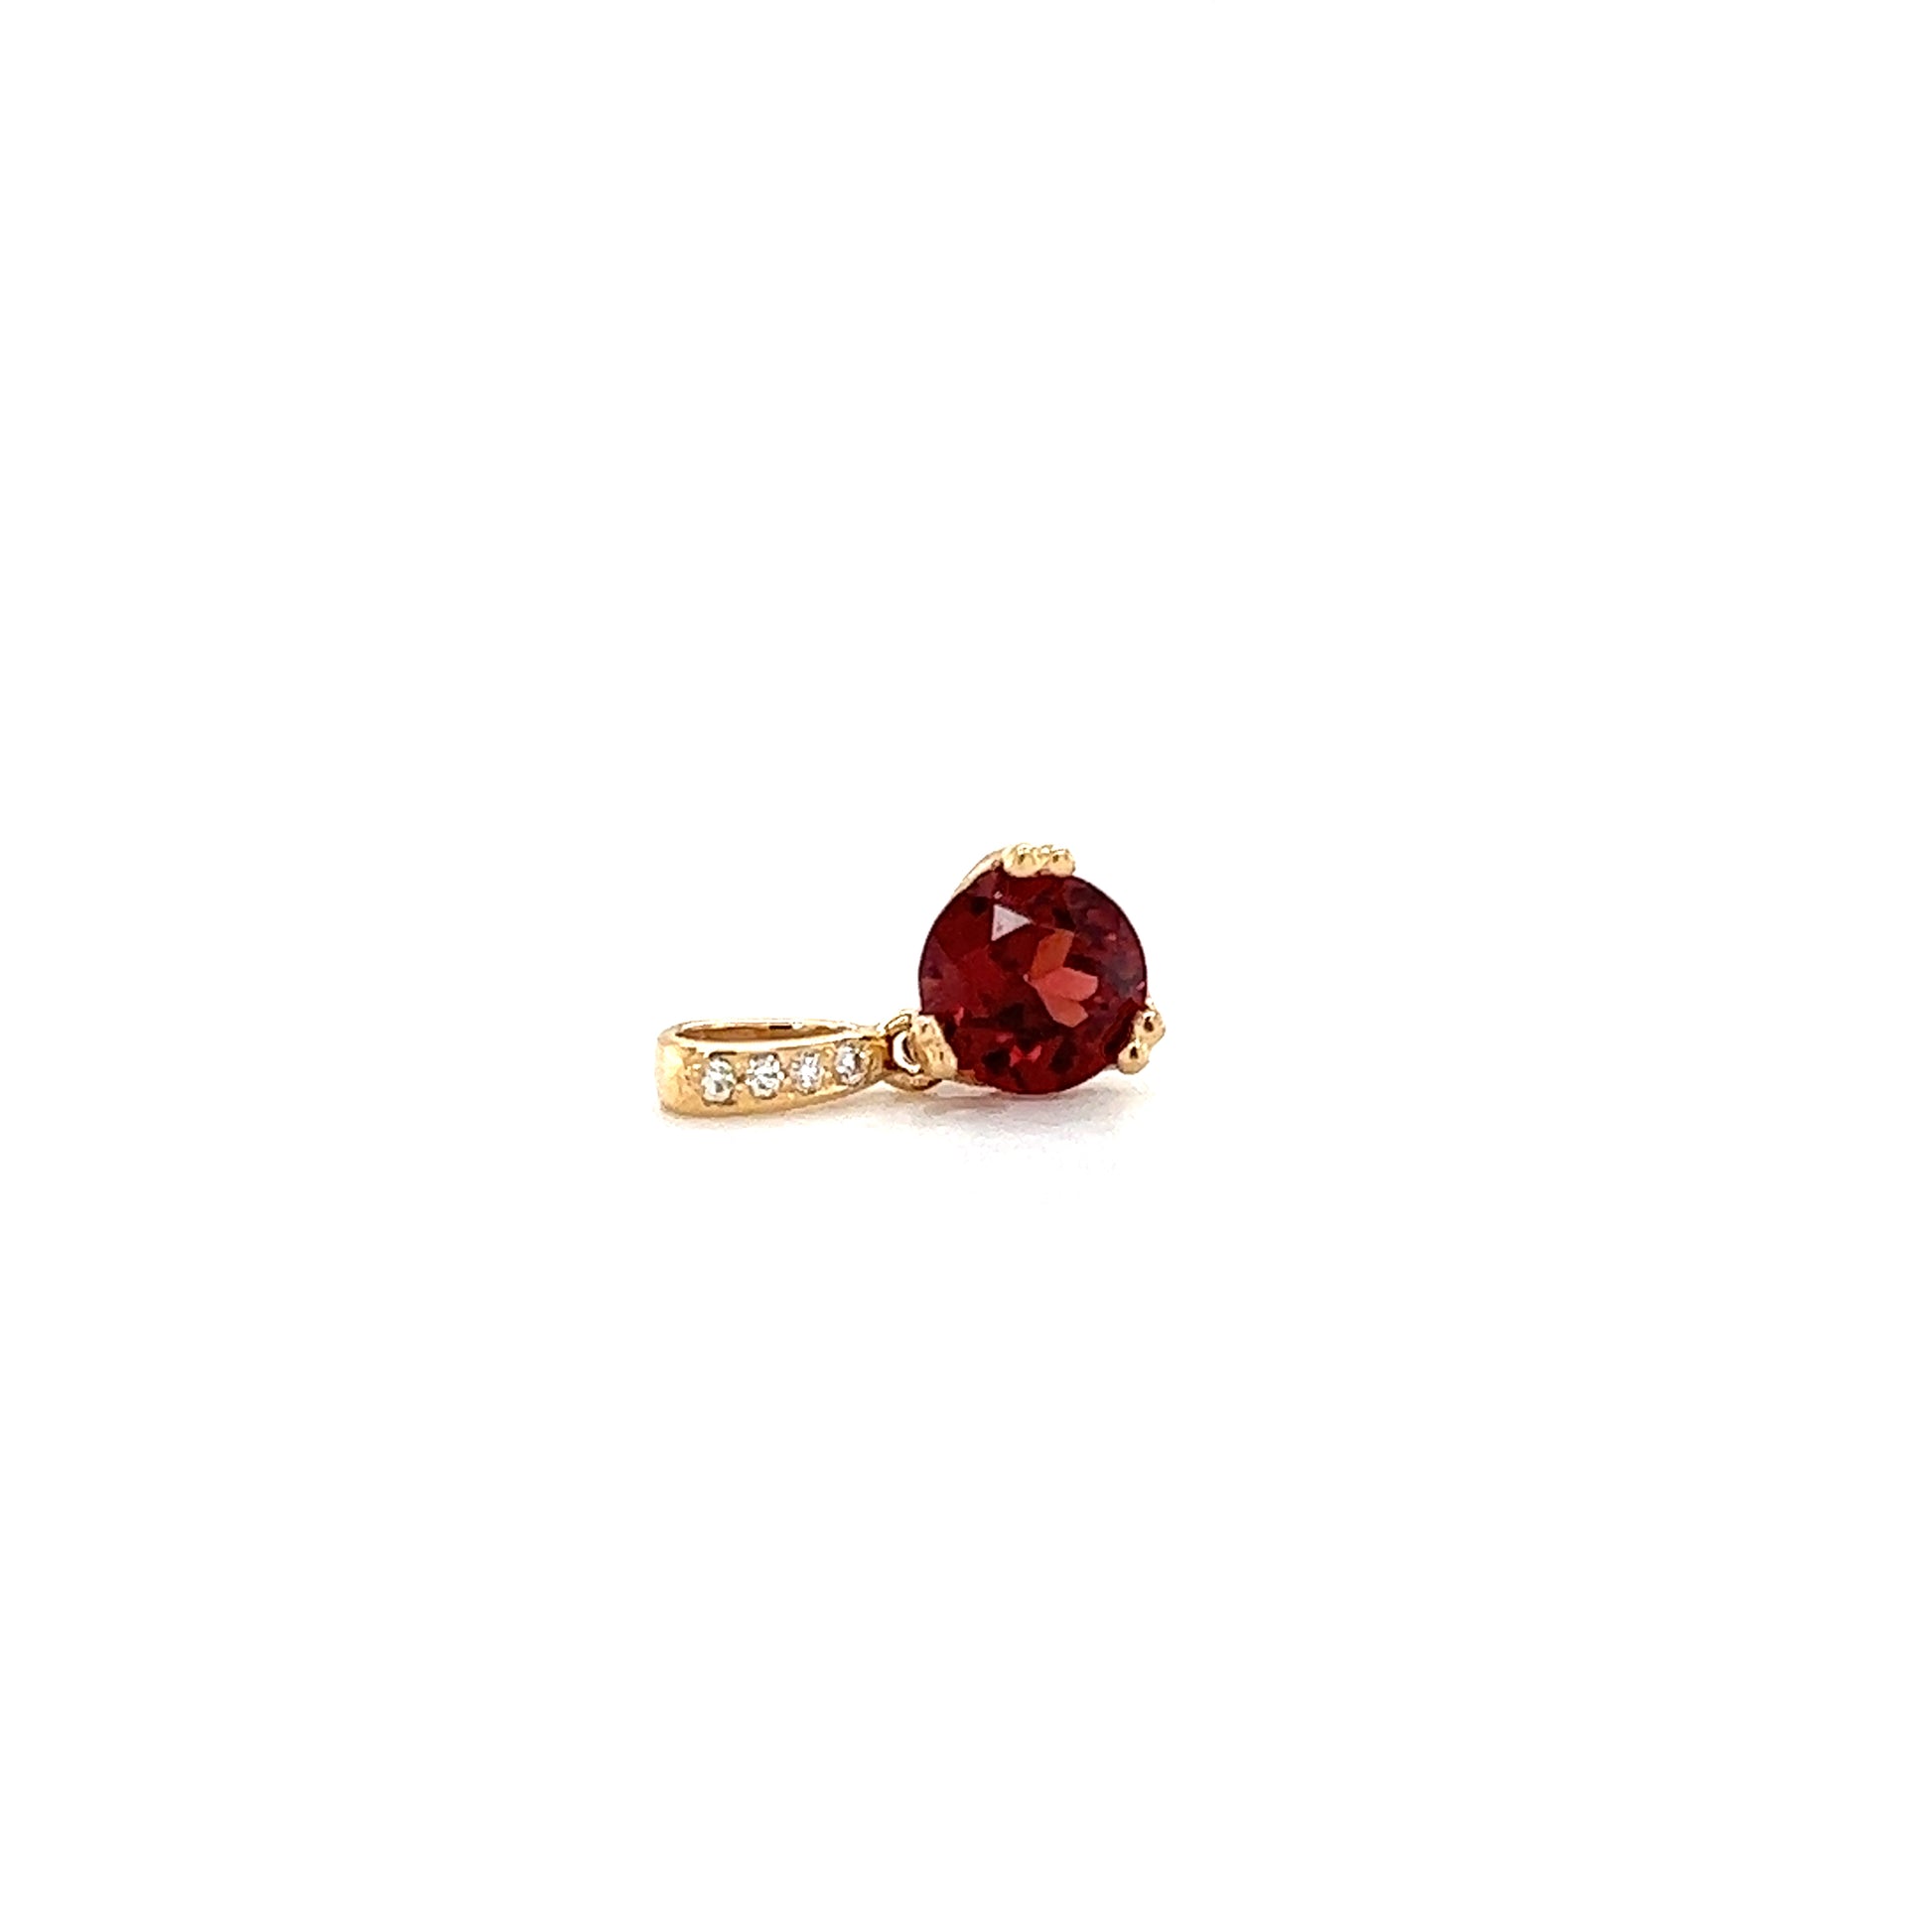 Round Garnet Pendant With Four Diamonds in 14K Yellow Gold Pendant Front Side View